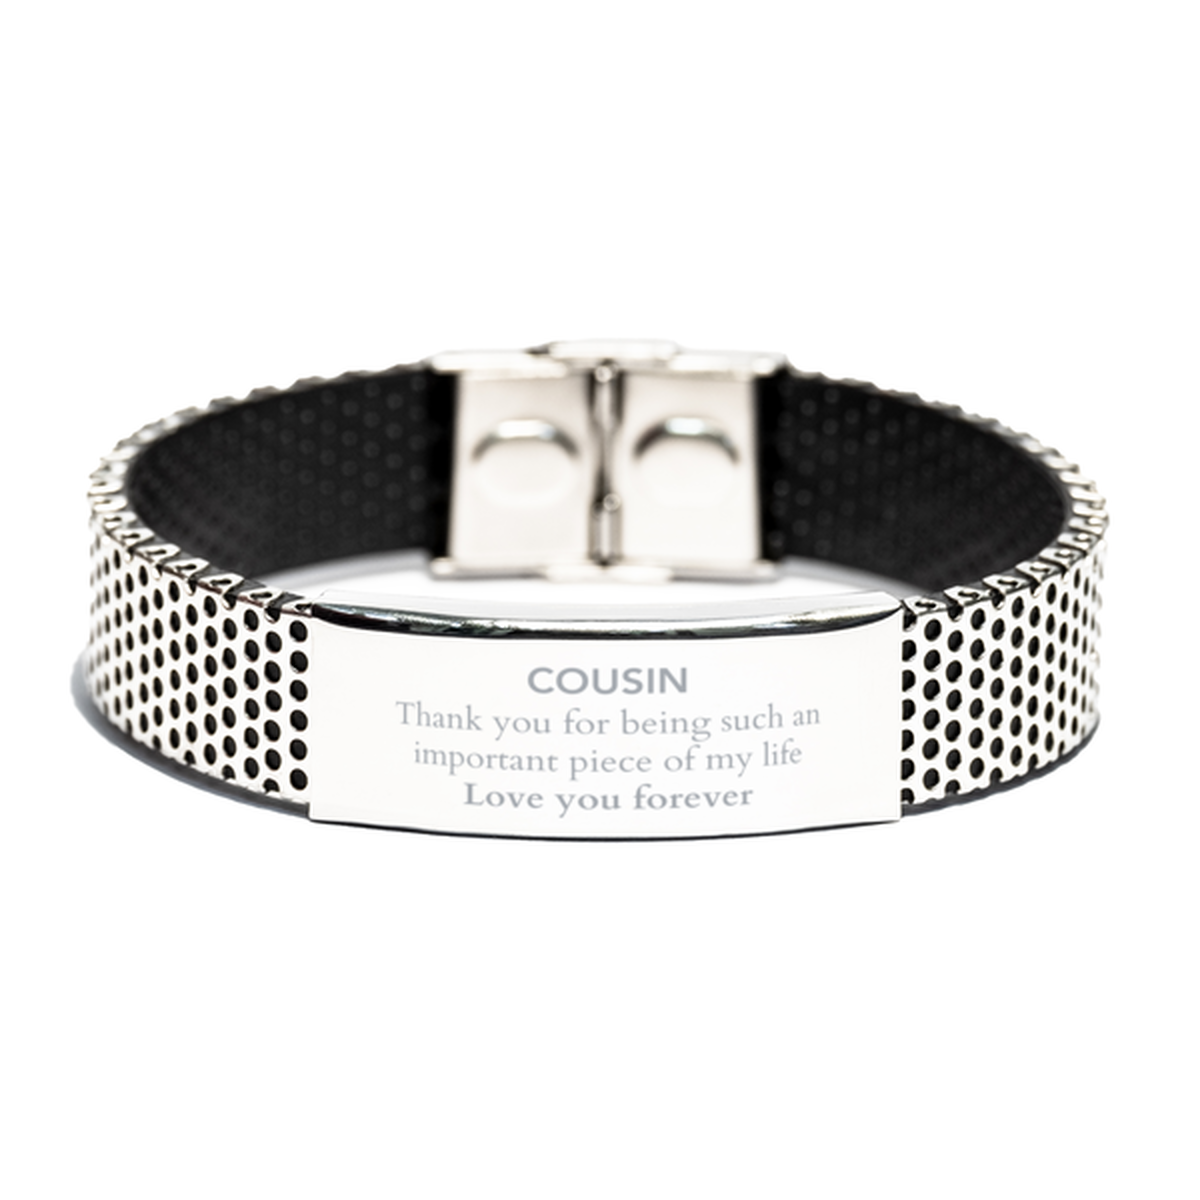 Appropriate Cousin Stainless Steel Bracelet Epic Birthday Gifts for Cousin Thank you for being such an important piece of my life Cousin Christmas Mothers Fathers Day